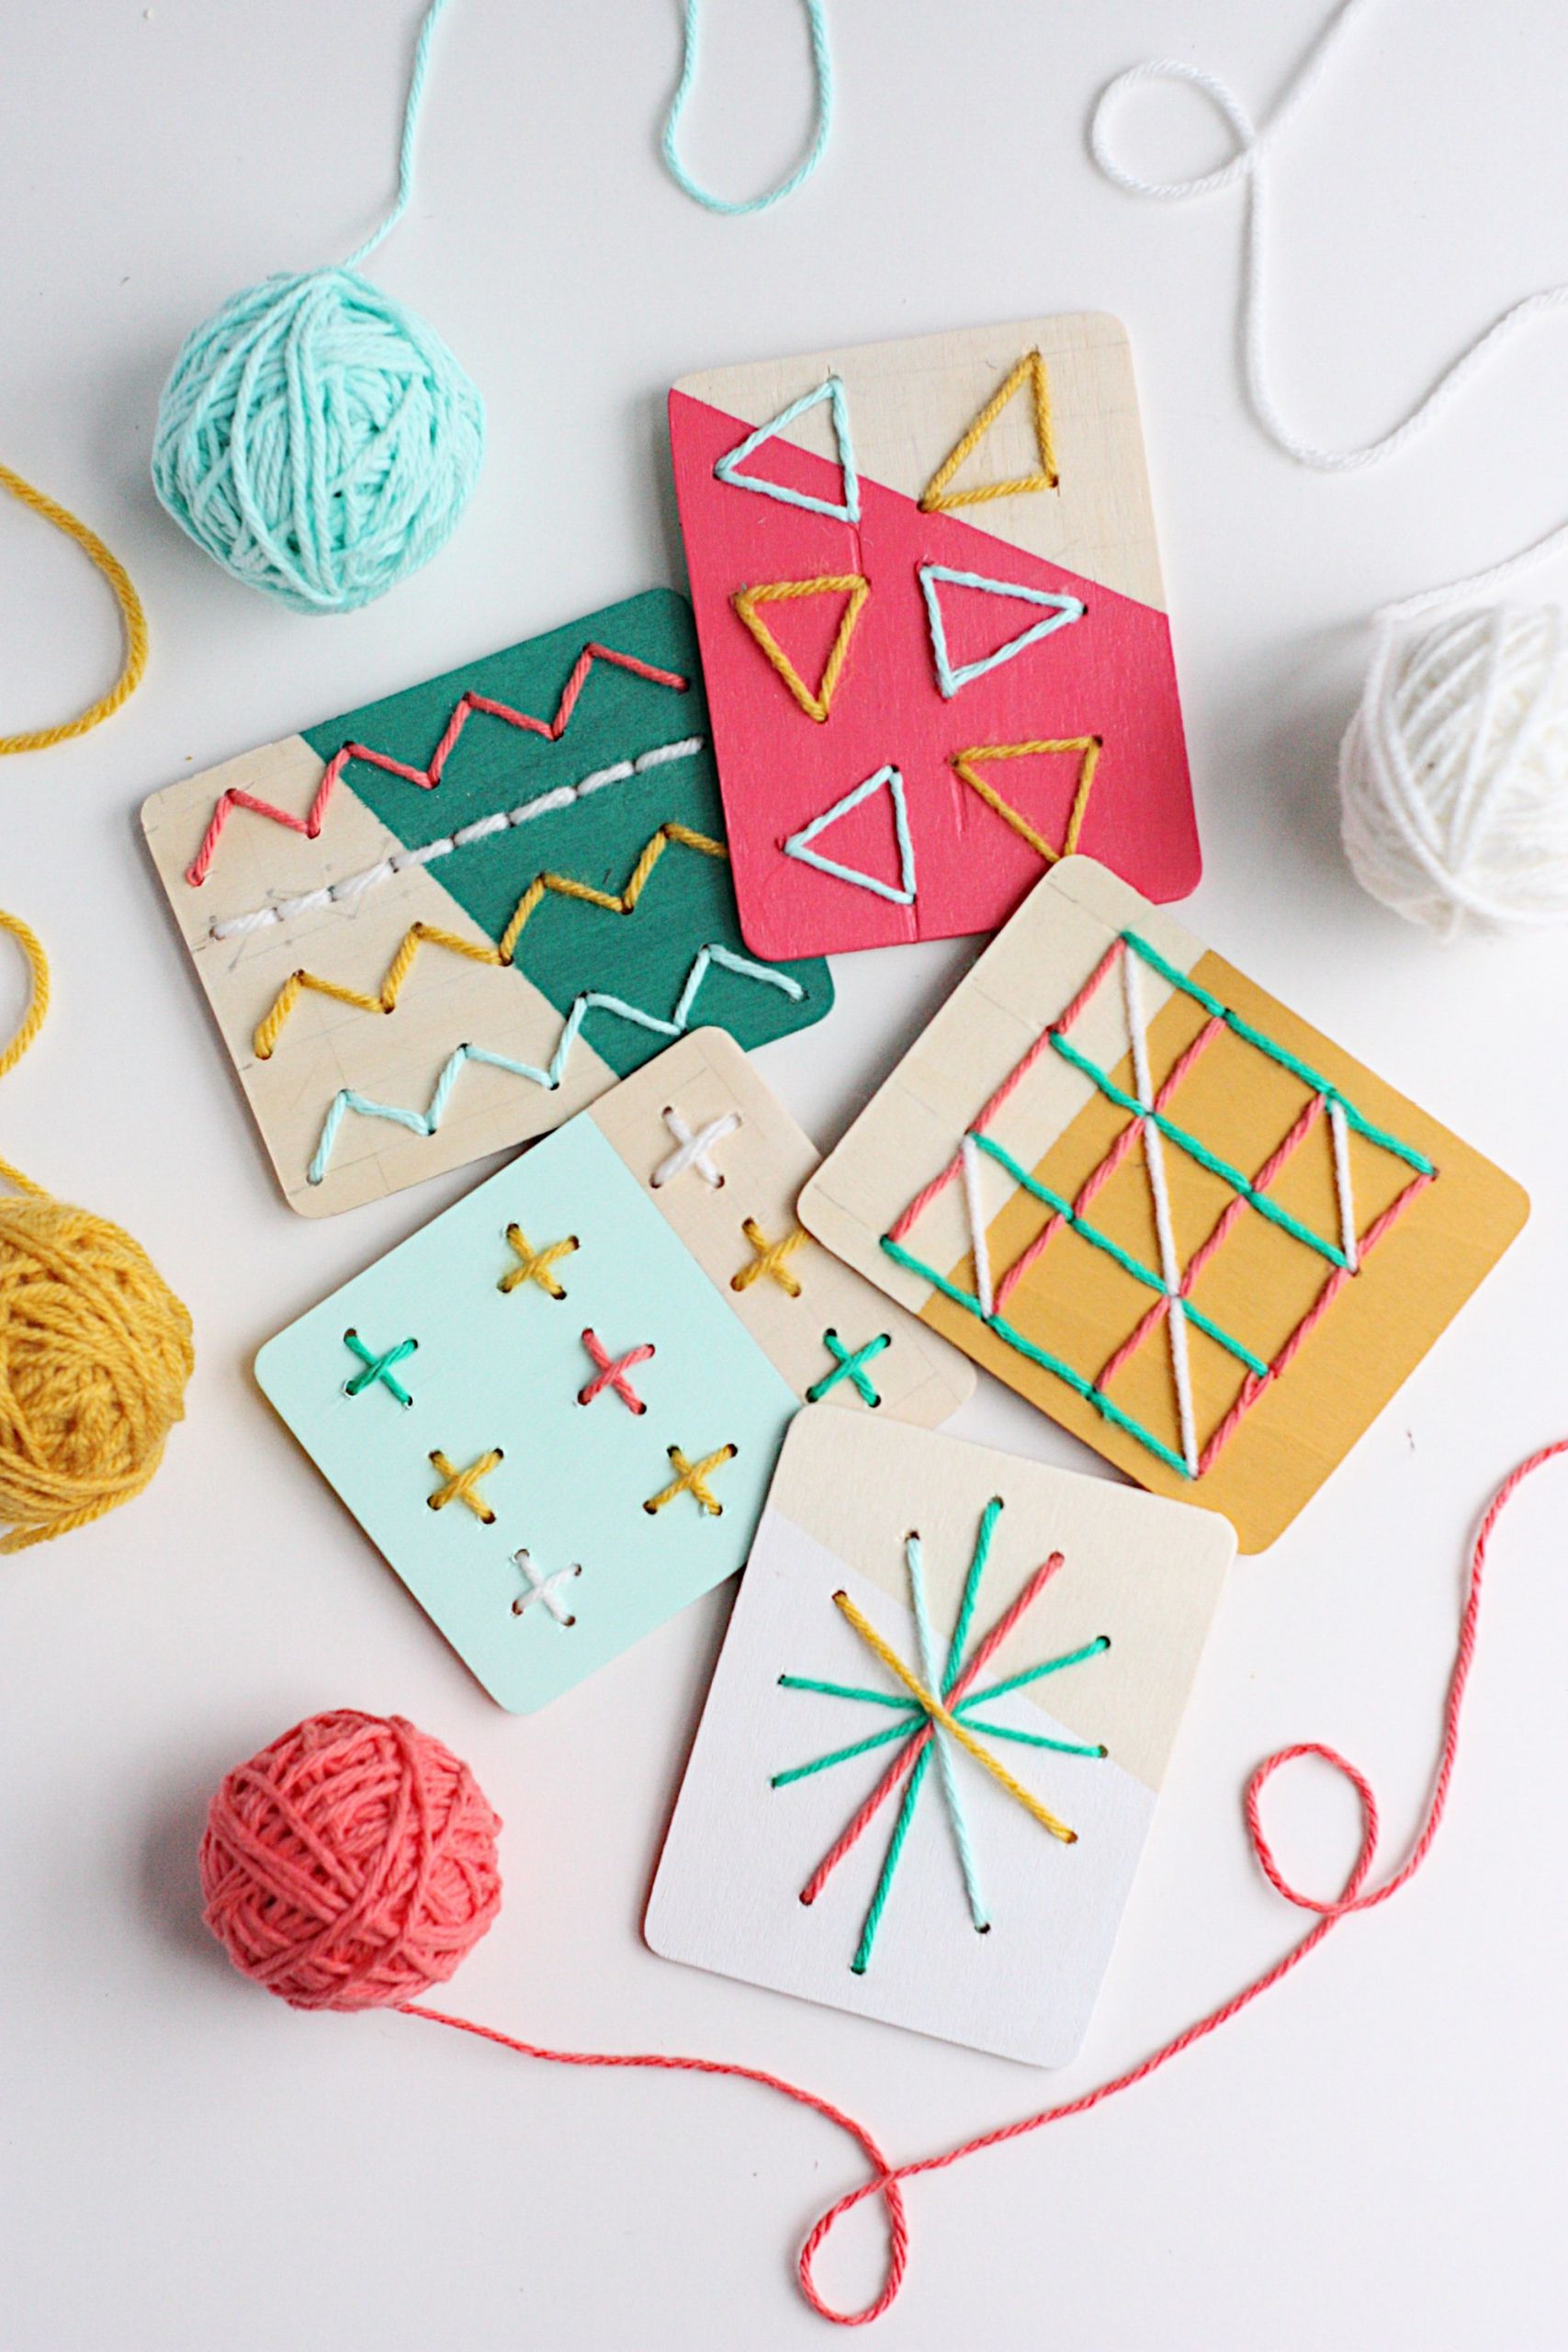 DIY Projects With Kids
 11 DIY Yarn Crafts That Will Amaze Your Kids Shelterness